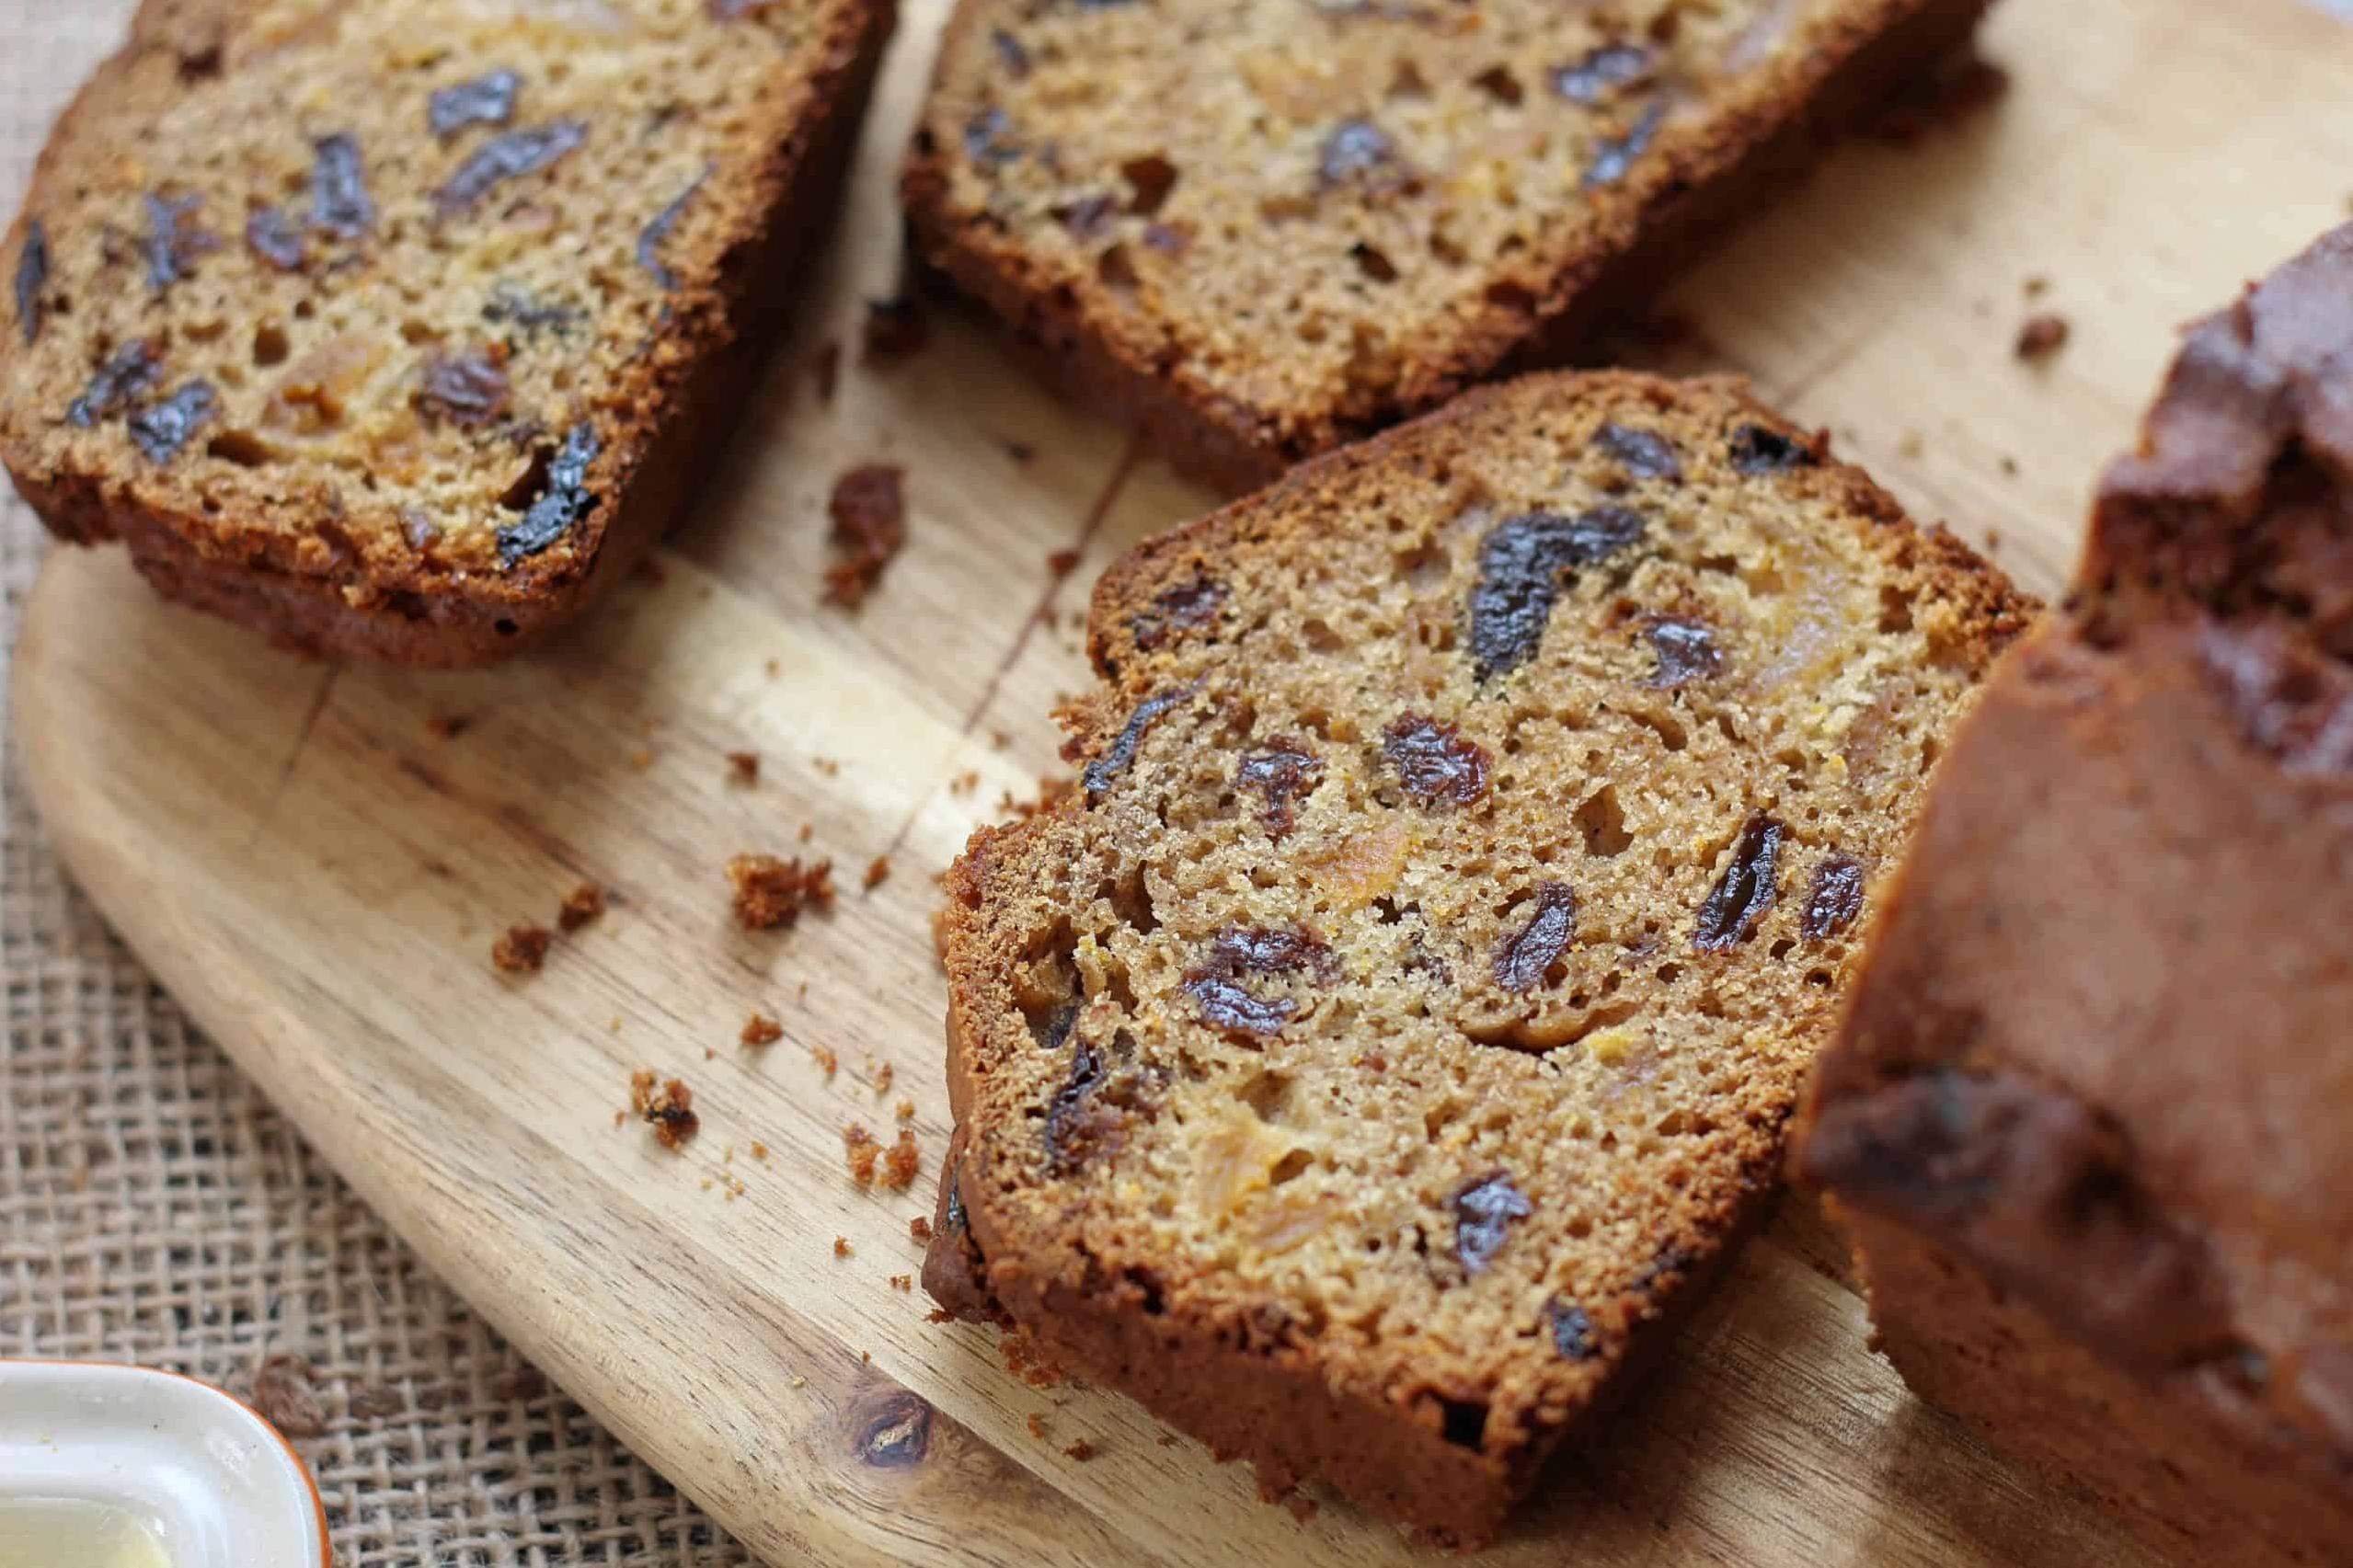  Every bite of this gluten-free tea bread is worth the indulgence.